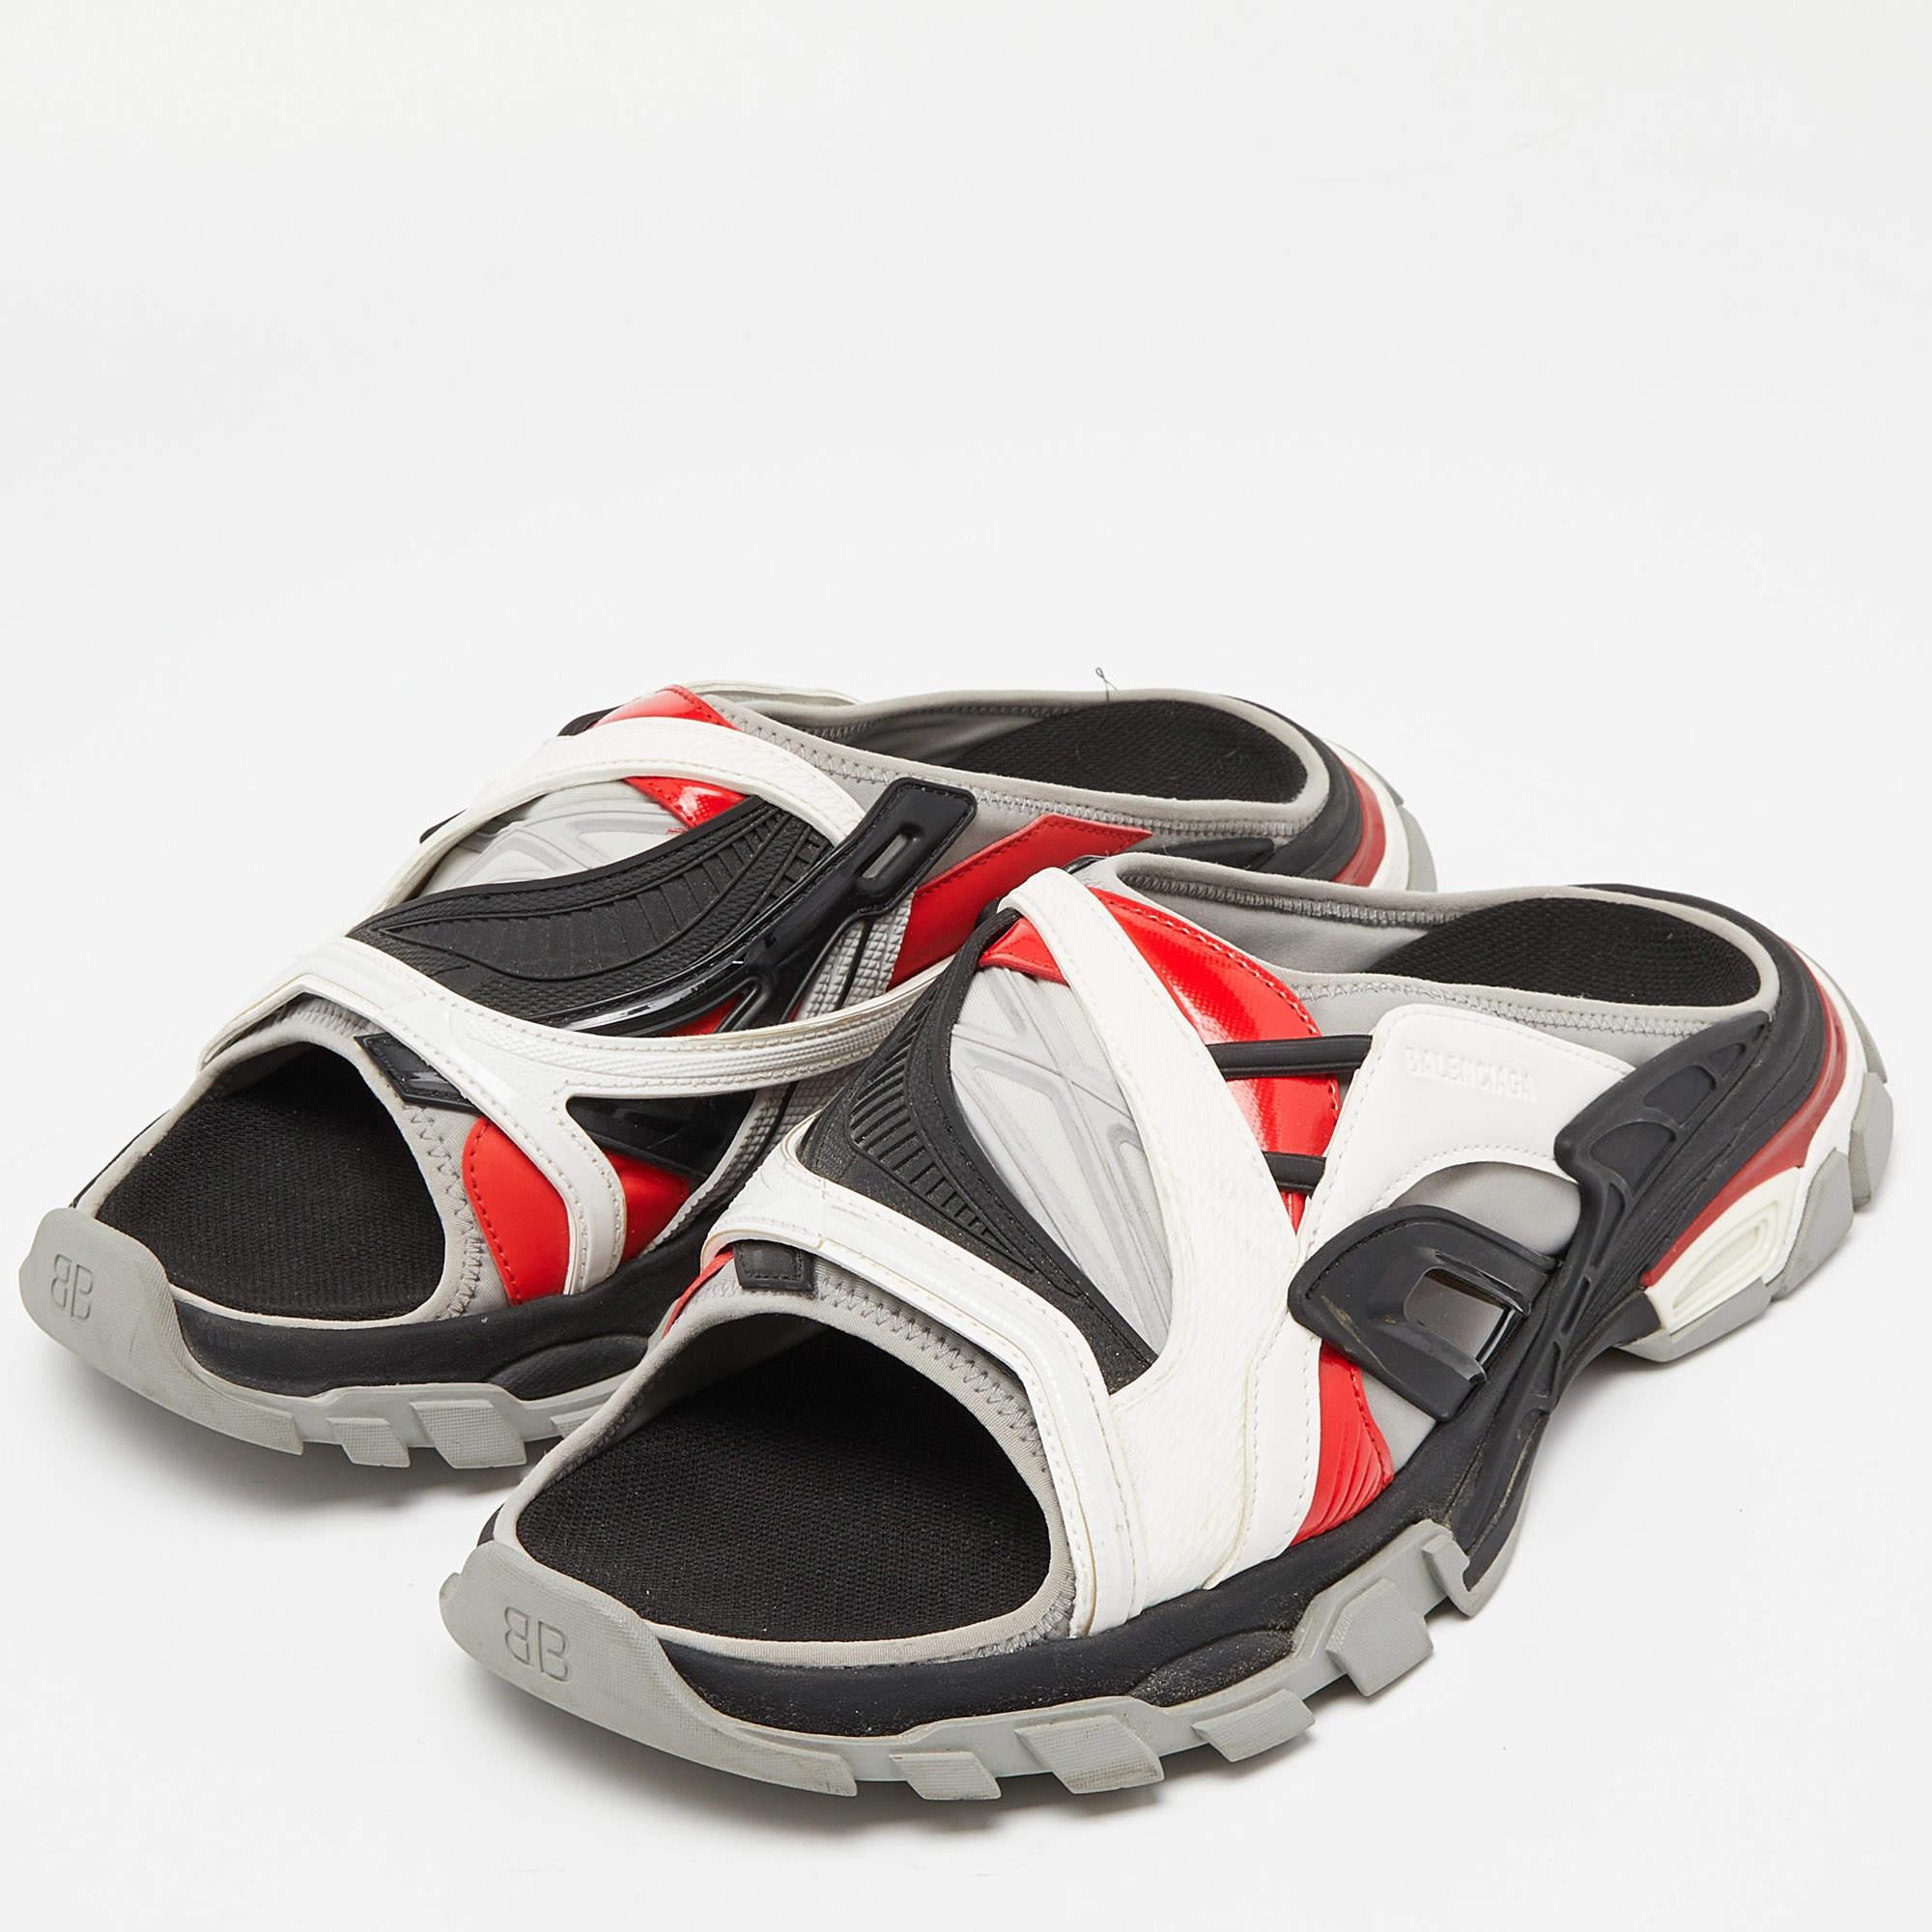 Balenciaga Tricolor Rubber and Leather Track Slides Size 45 3